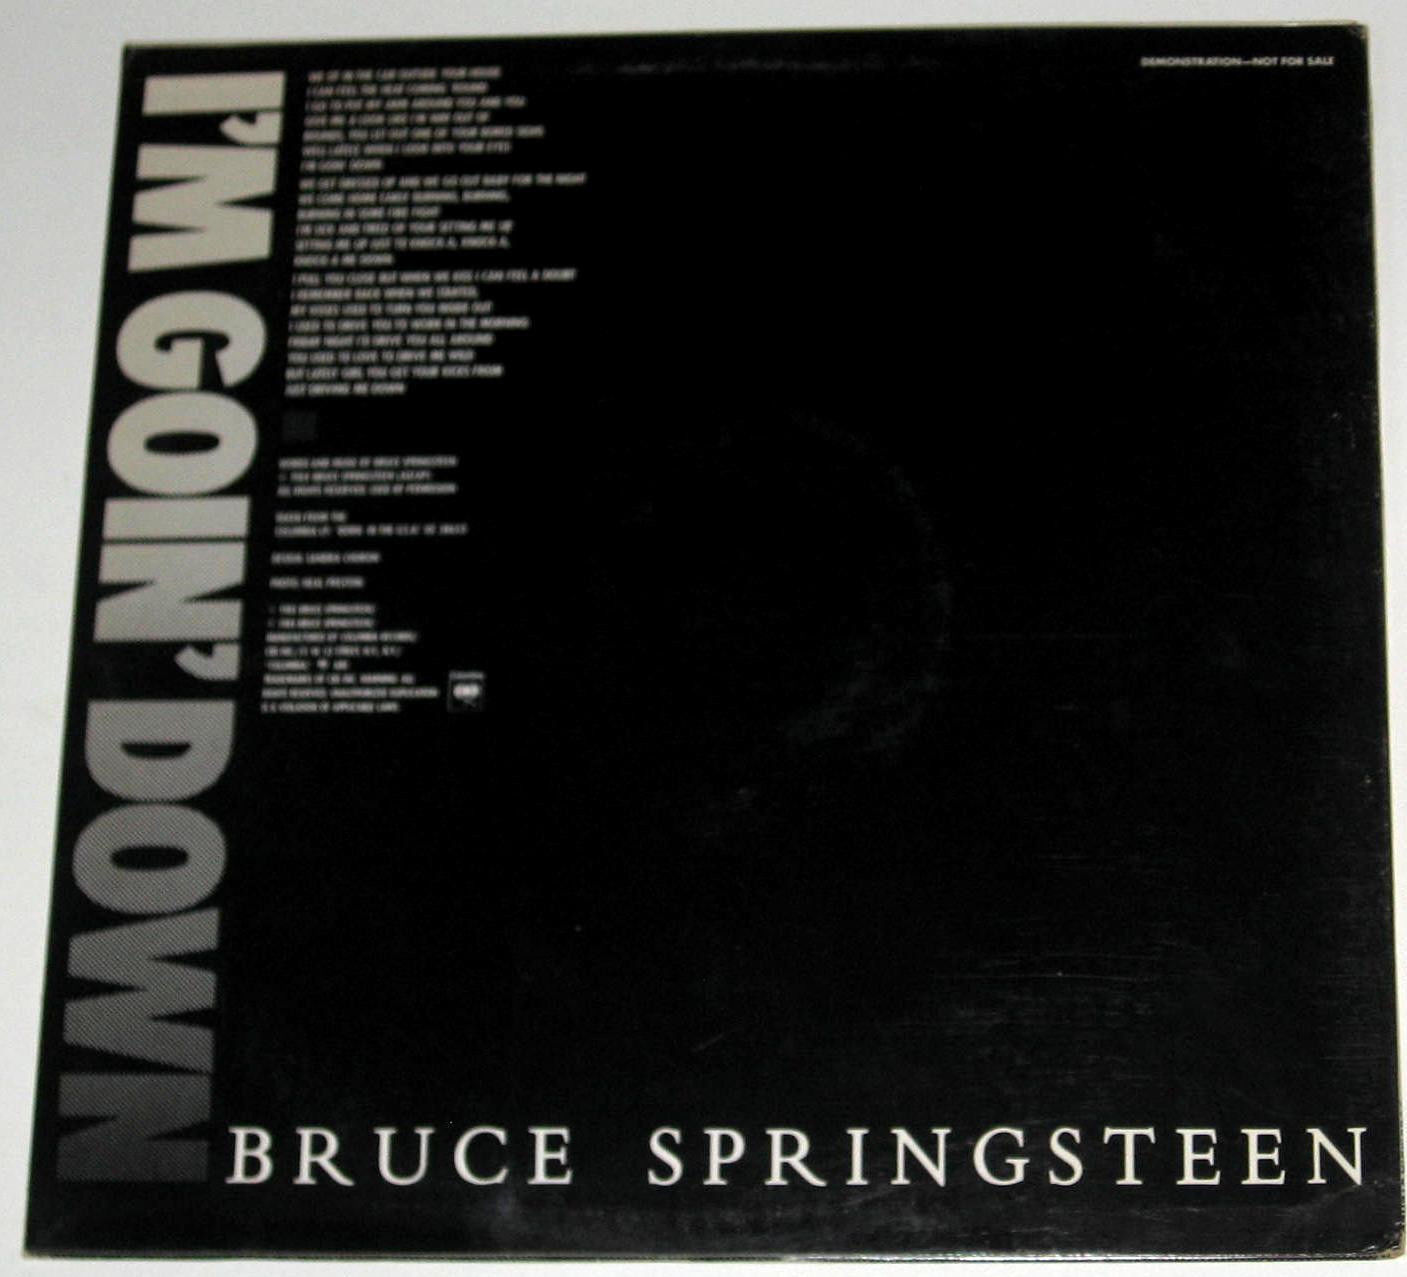 Bruce Springsteen I'M GOIN' DOWN US Promo 12" Single w B/W Demonstration Cover